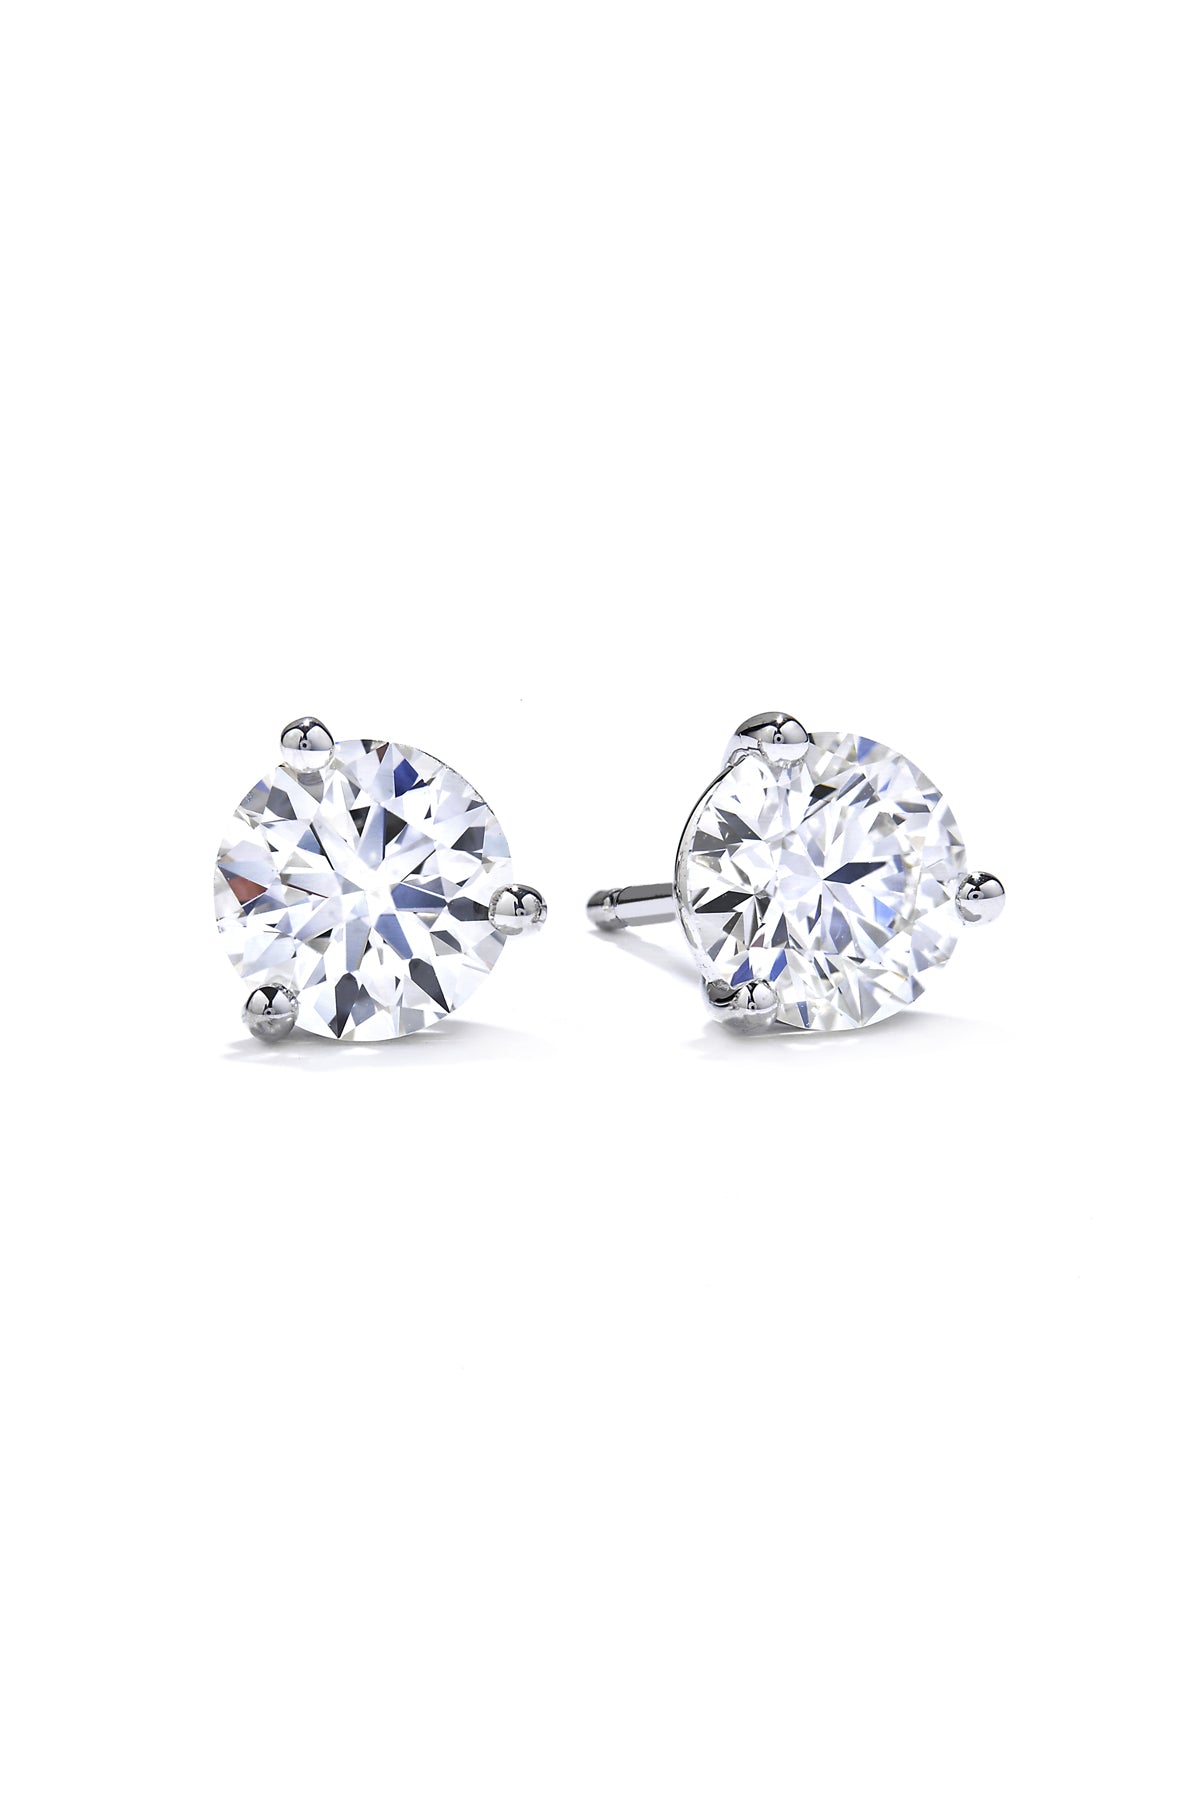 Three-Prong Diamond Stud Earrings From Hearts On Fire available at LeGassick Diamonds and Jewellery Gold Coast, Australia.